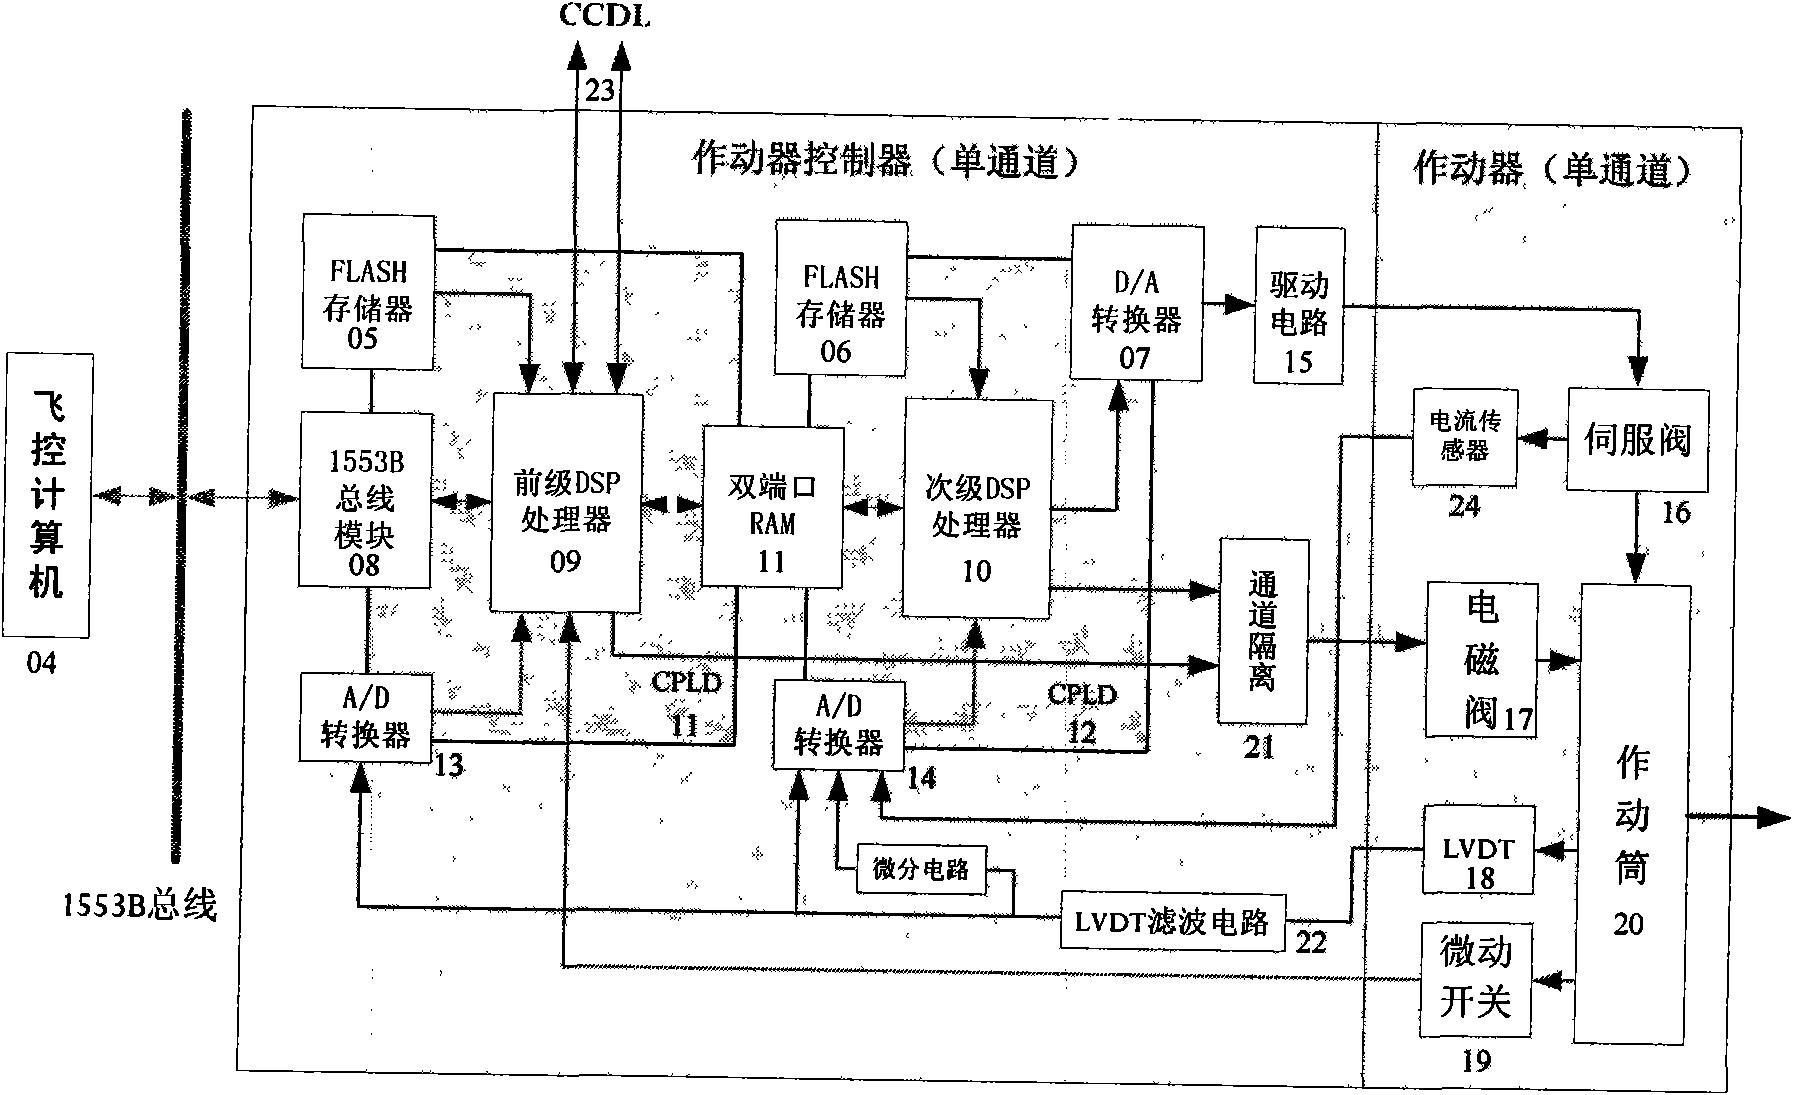 High-performance tri-redundancy steering engine based on single-channel dual-processor structure